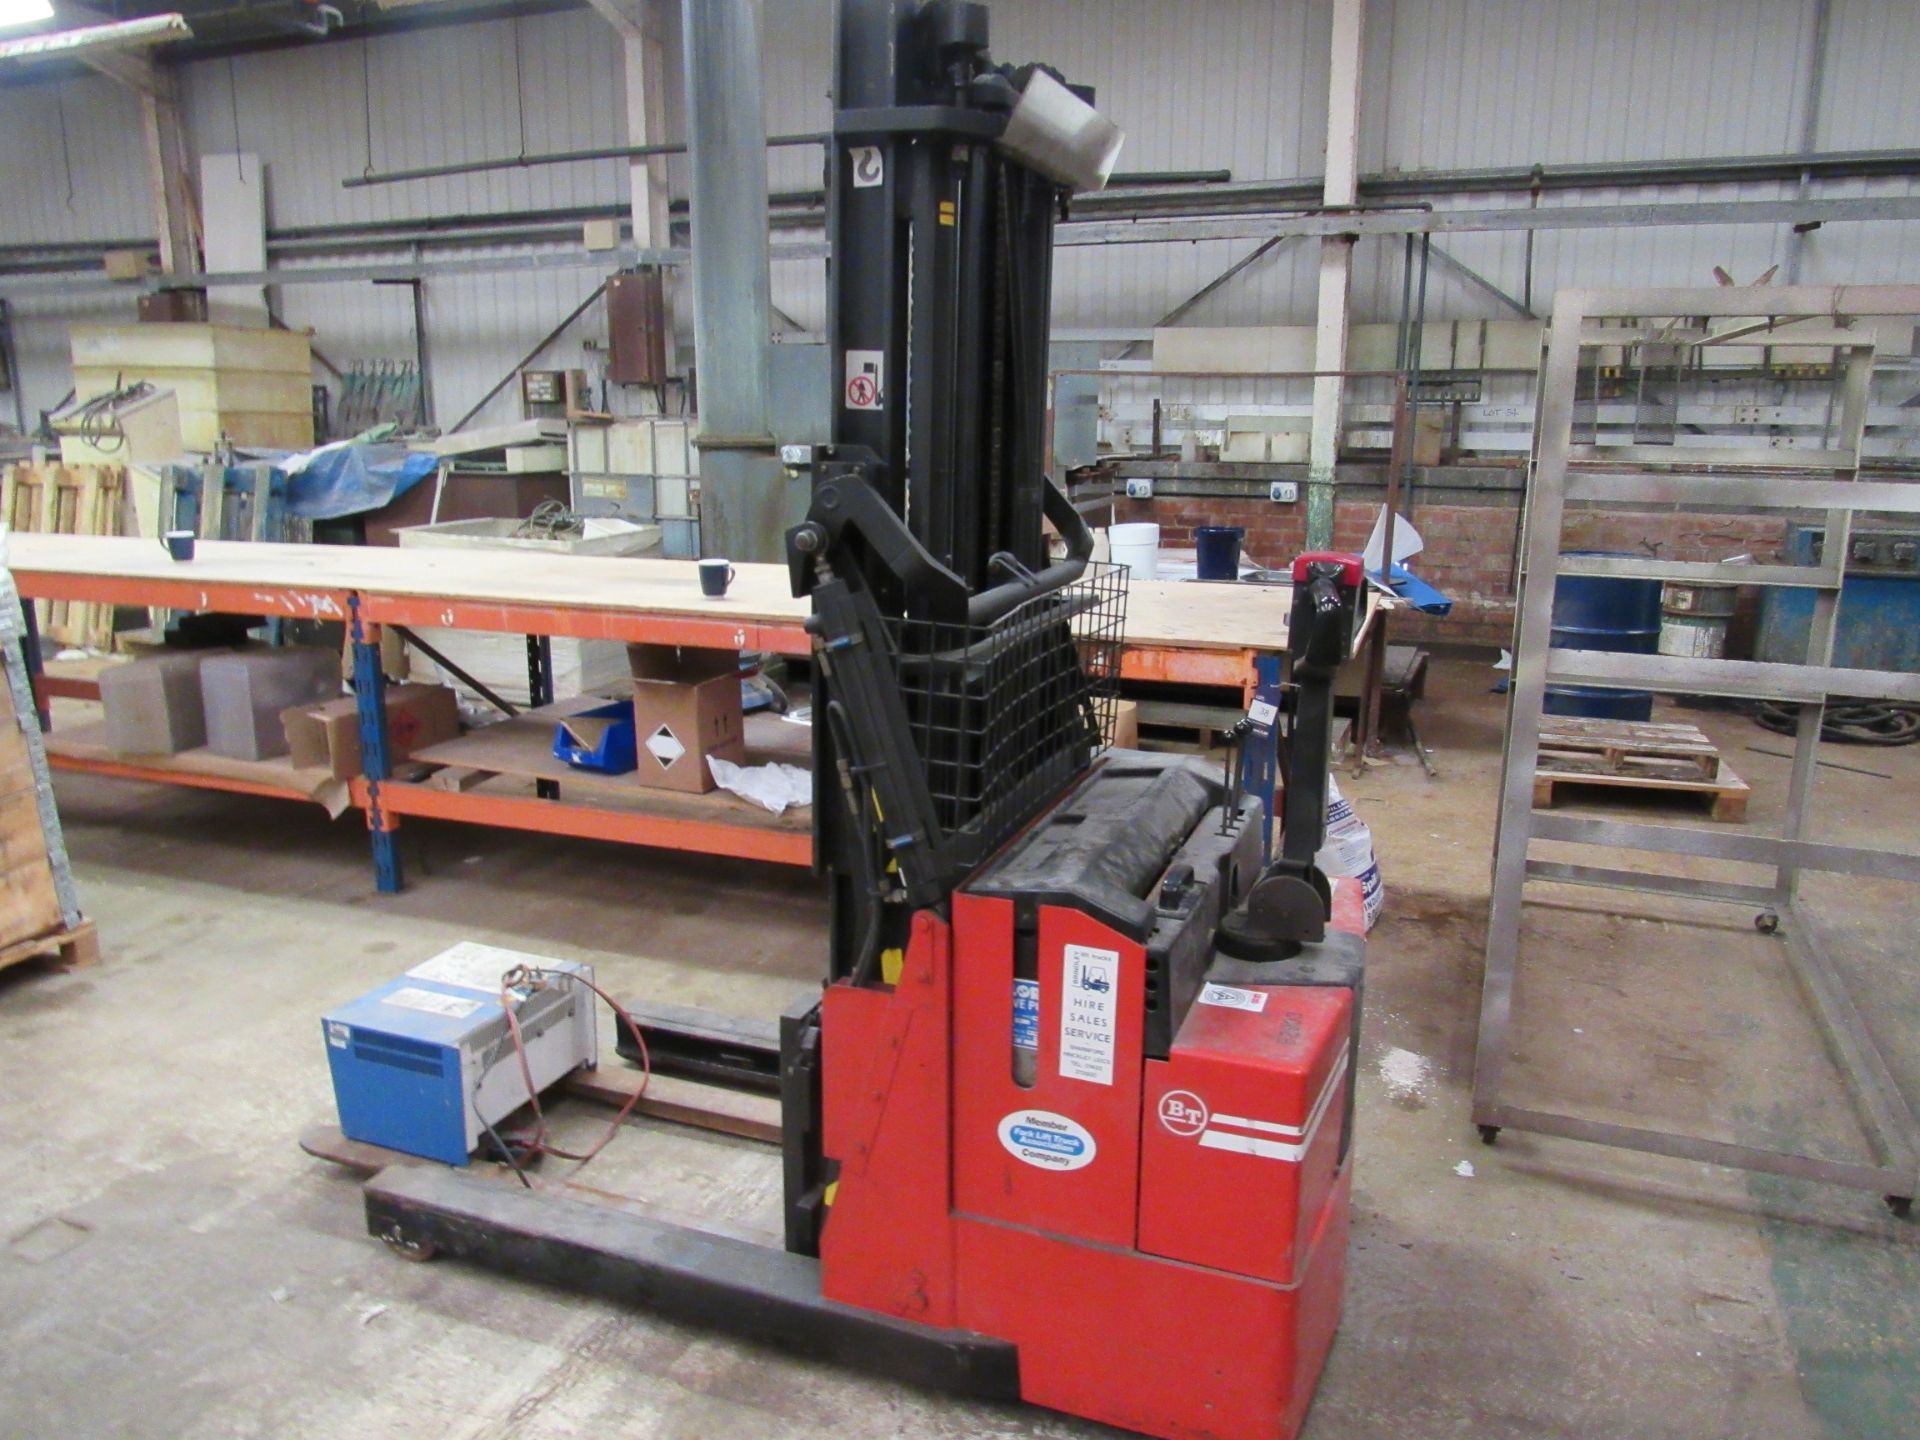 BT LSR 1200/2 1200Kg Electric 3 Axis Stacker Truck with Charger - Located on the first floor. The - Image 3 of 5